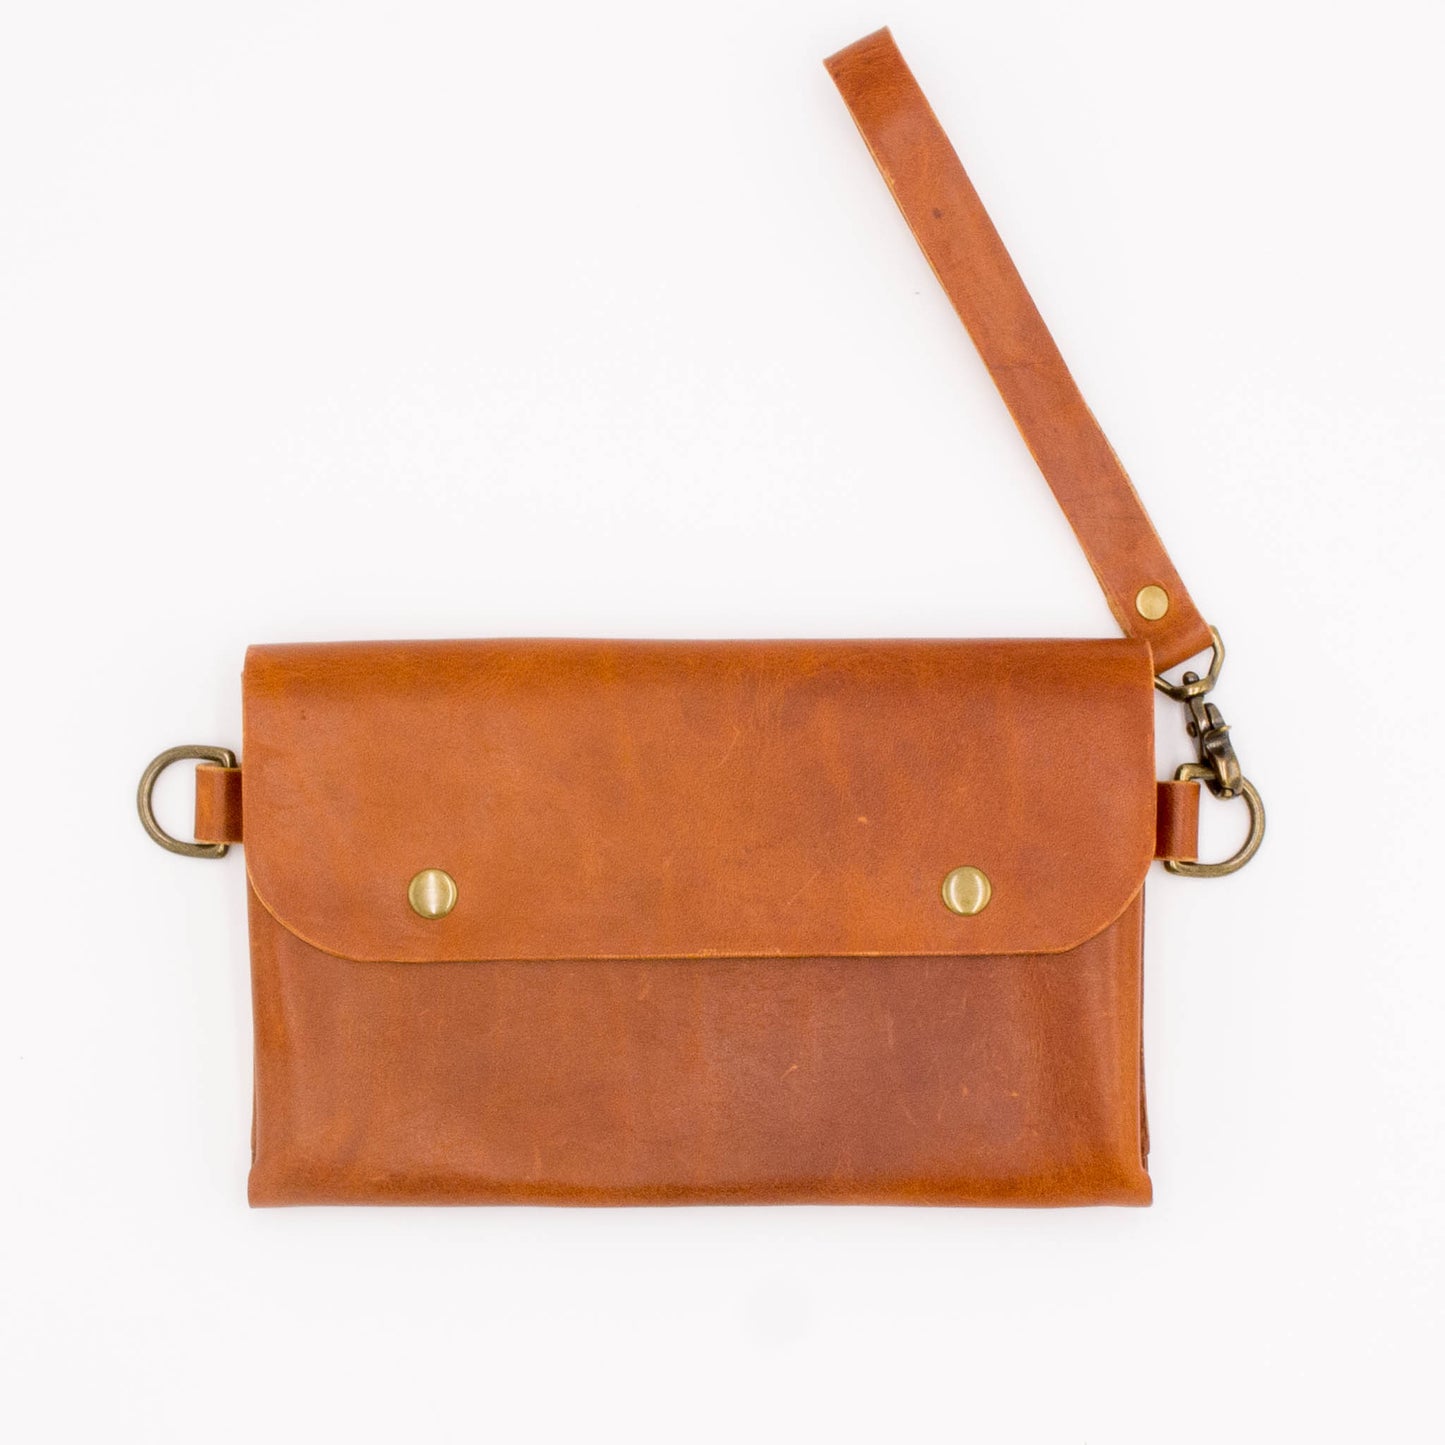 Handcrafted Mini Leather Convertible Crossbody Clutch Bag - English Tan